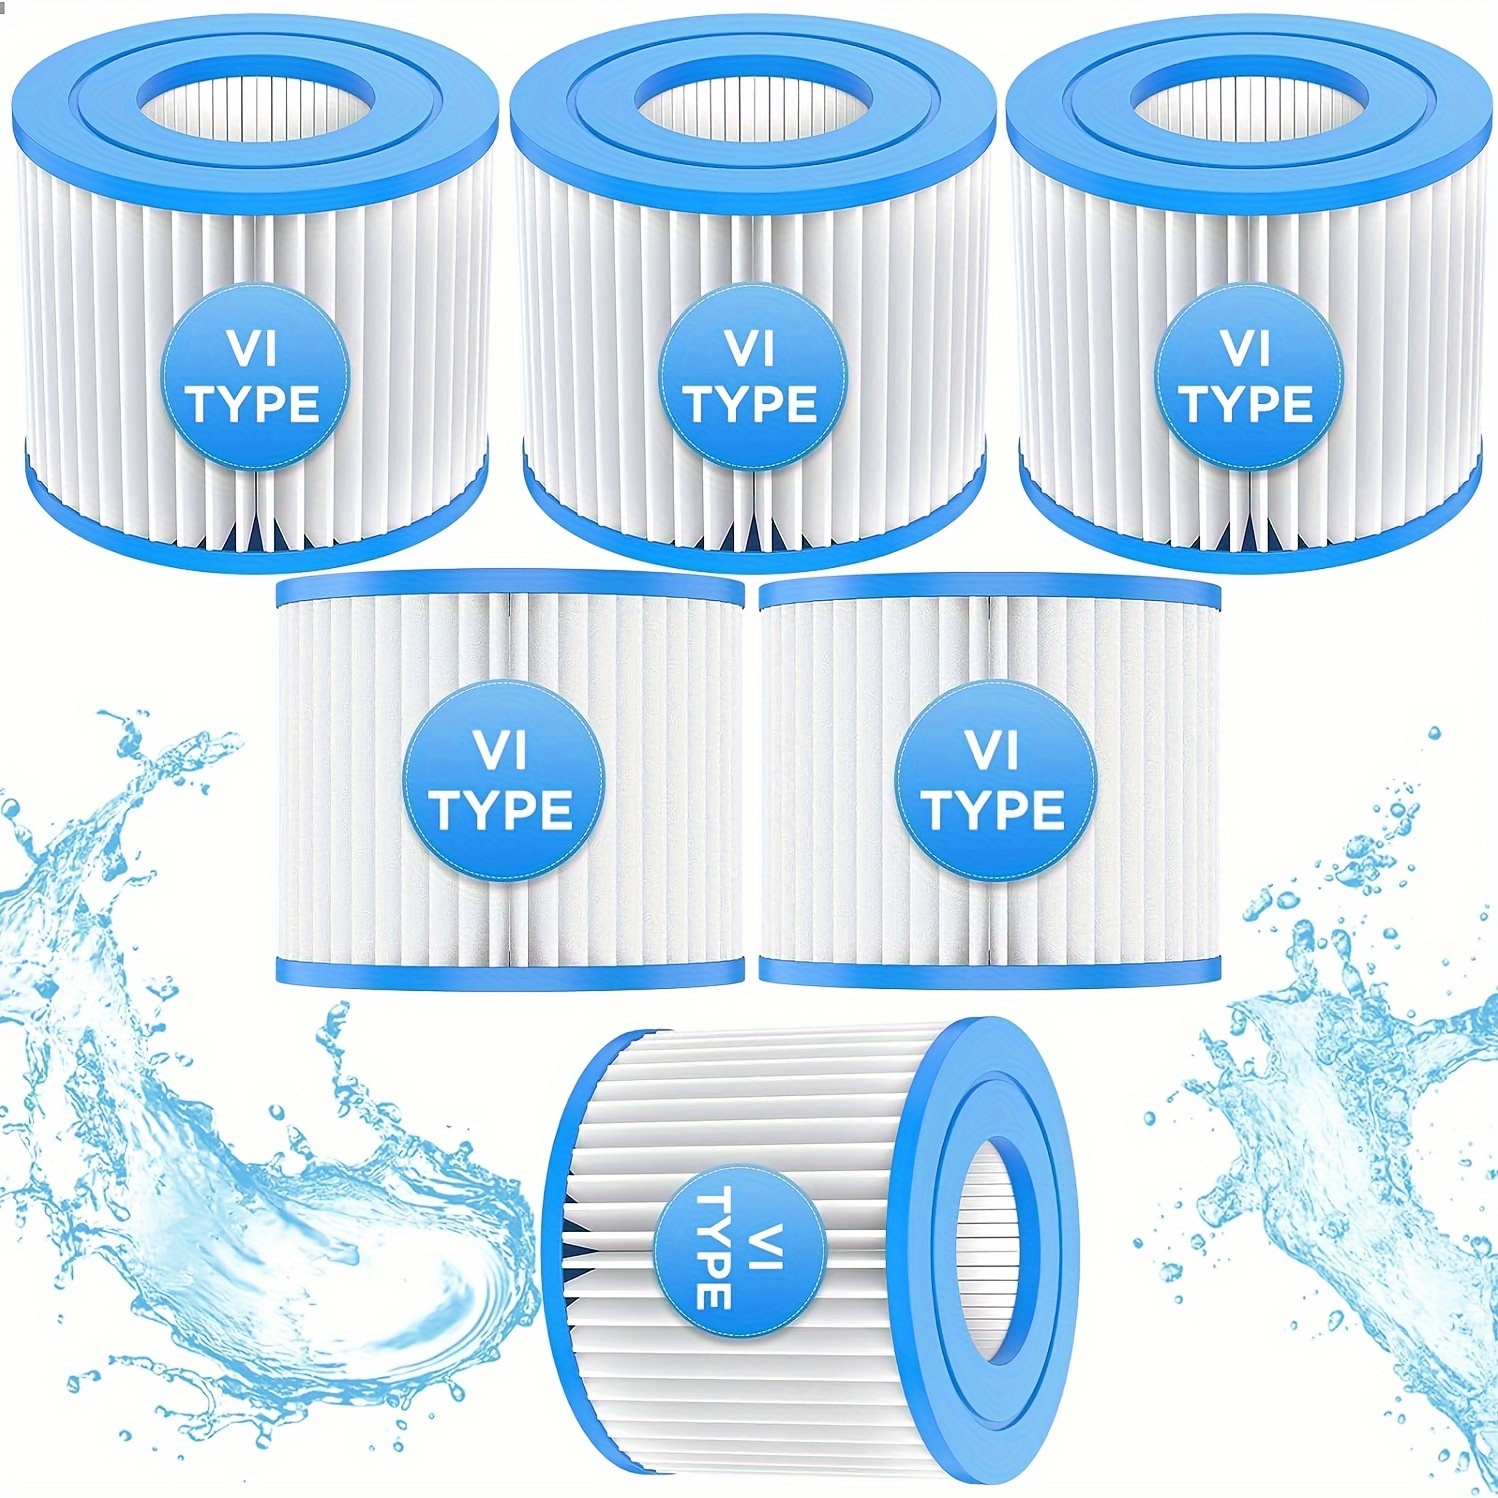 

6pcs, Hot Tub Filter 6 Pieces Of Spa Filter Vi Type Filter Element For Kohlerman Saluspa Hot Tub Filter Replacement Parts 90352e 58323e Suitable For Lay-z-spa, Spa Filter , Pool Filter Pump